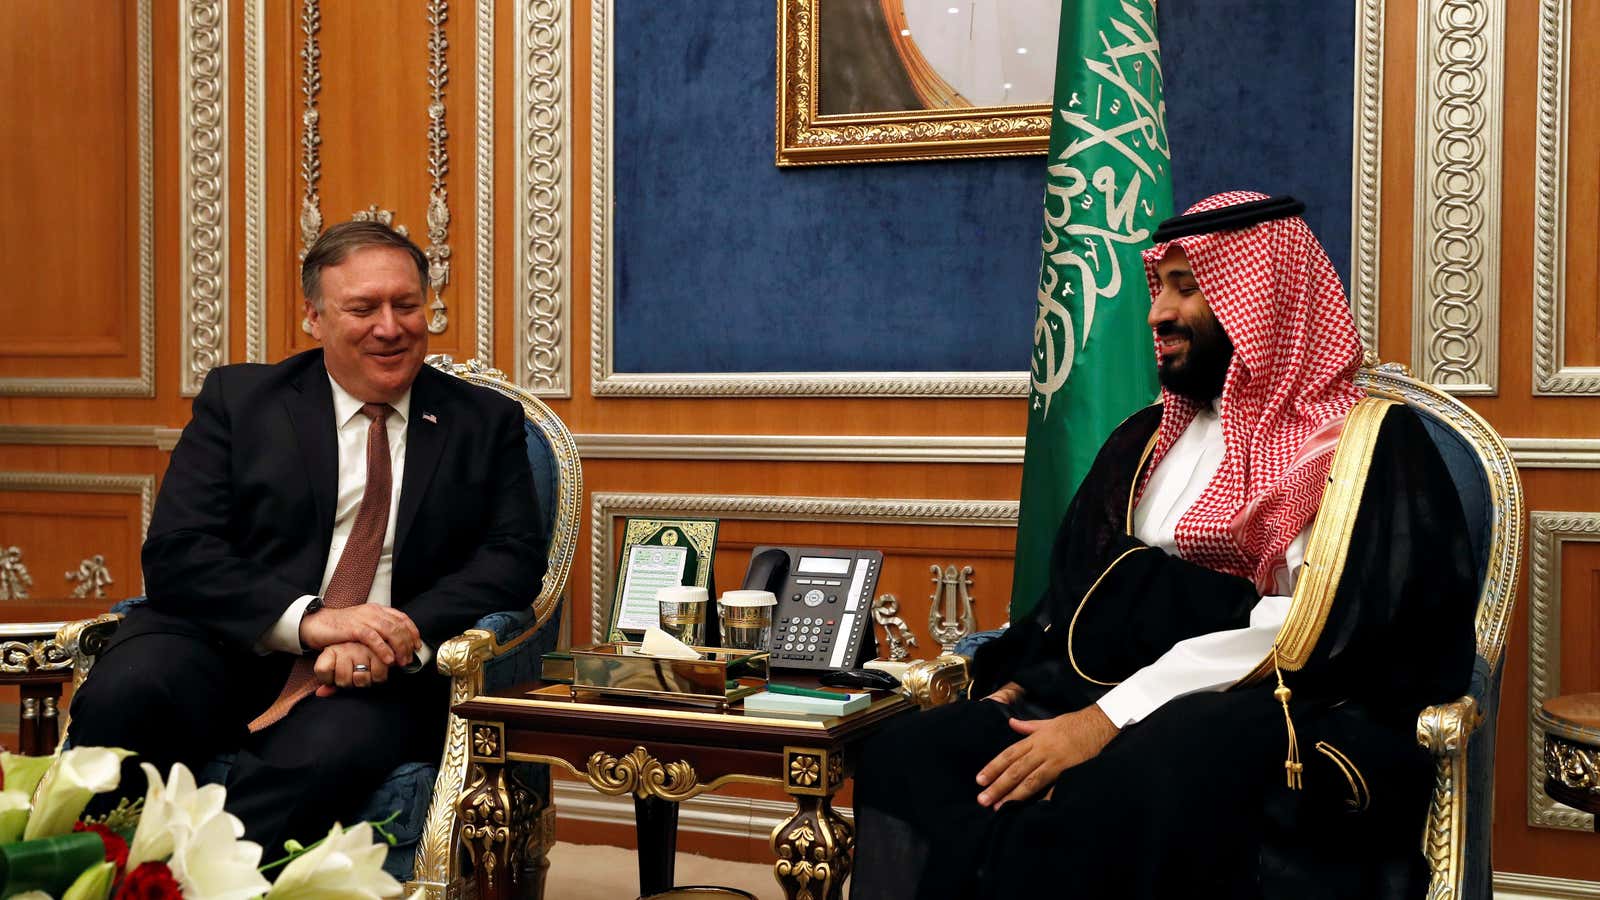 Pompeo and the Crown Prince in Riyadh on Oct. 16, 2018.